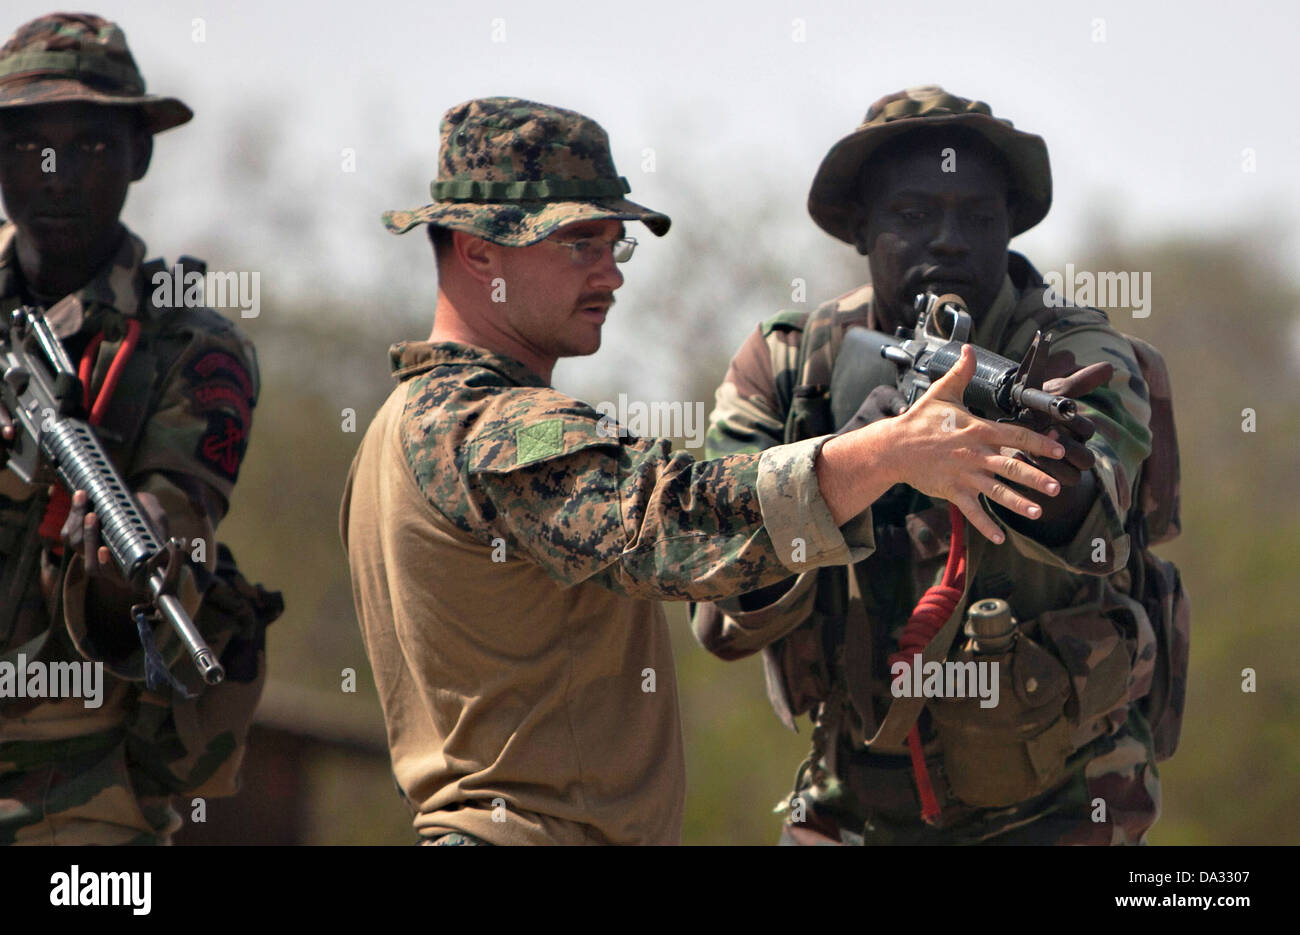 A US Marine instructor teaches a Senegalese Companie de Fusilier Marine Commandos how to fire a M-4 rifle during light infantry training April 22, 2013 in Toubacouta, Senegal, May 9, 2013. Stock Photo